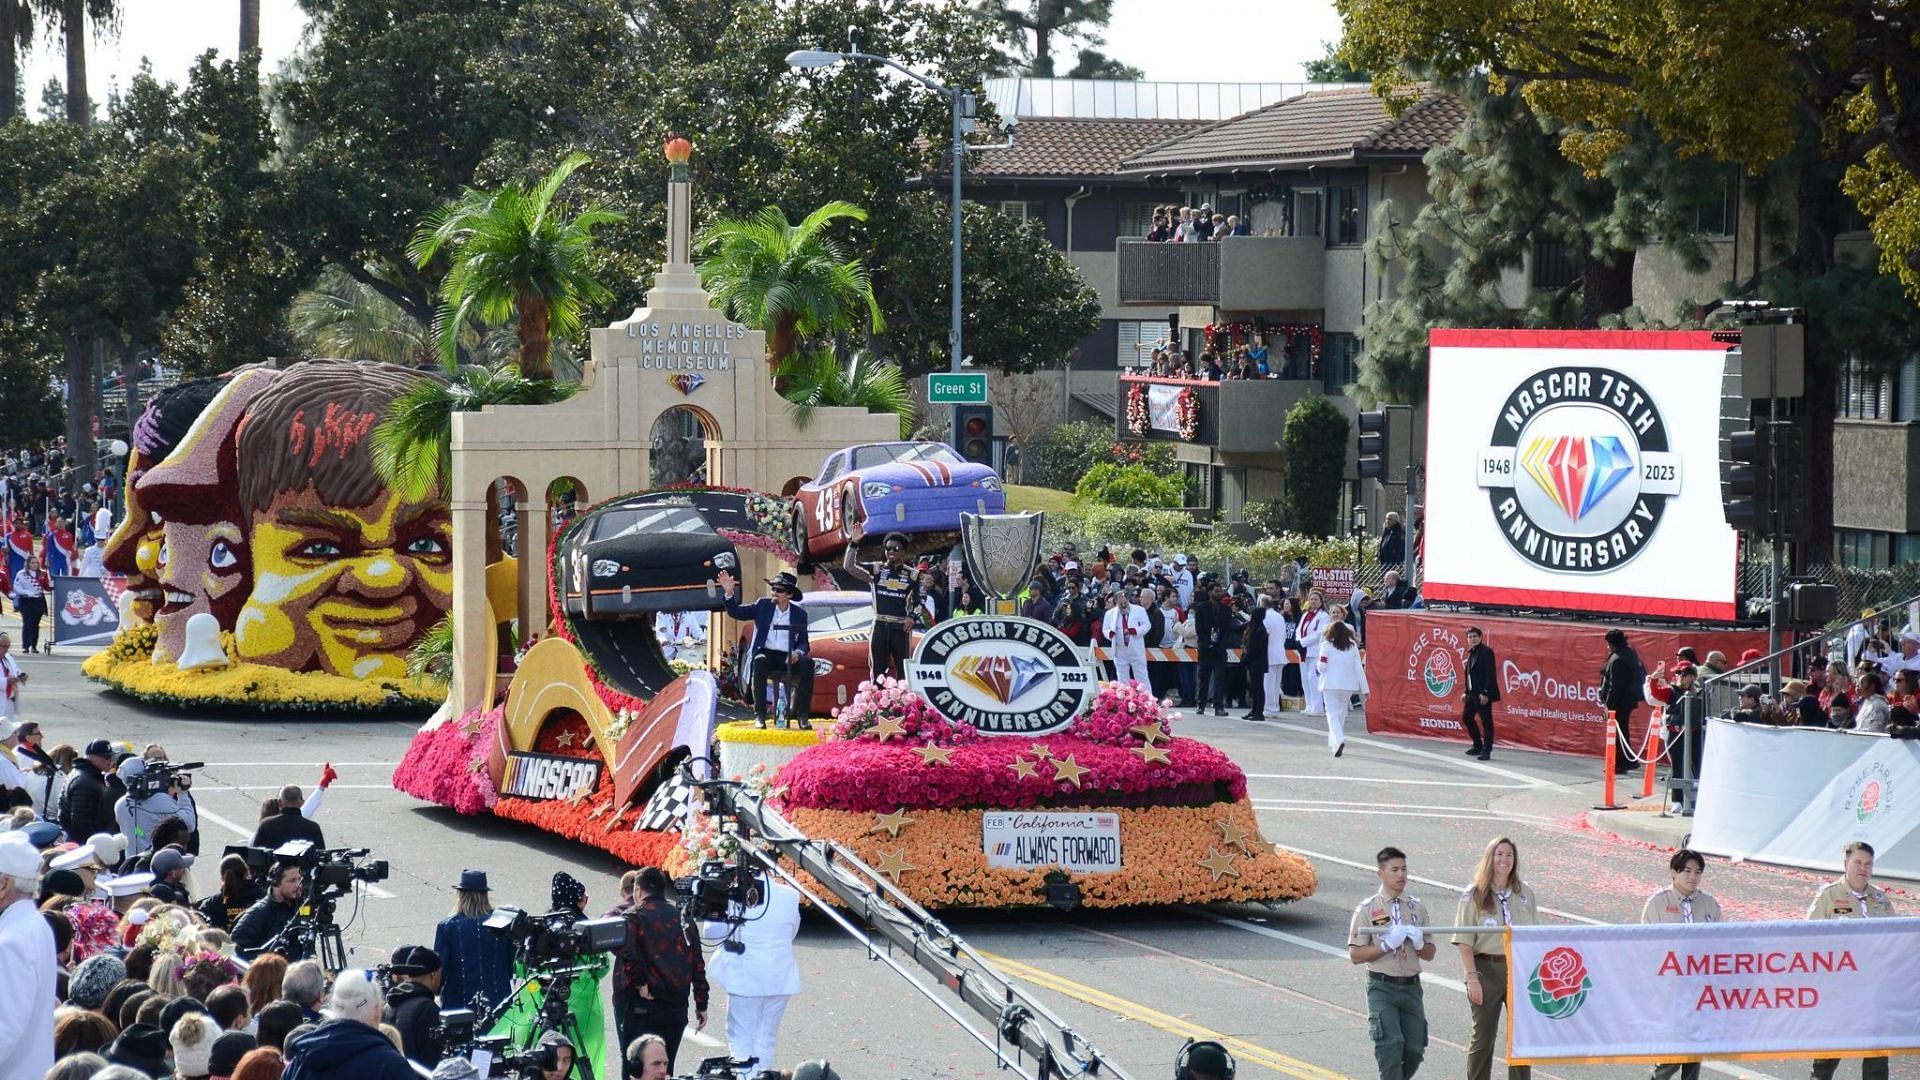 "The 48 should be up there" NASCAR fans react to 2023 Rose Parade float